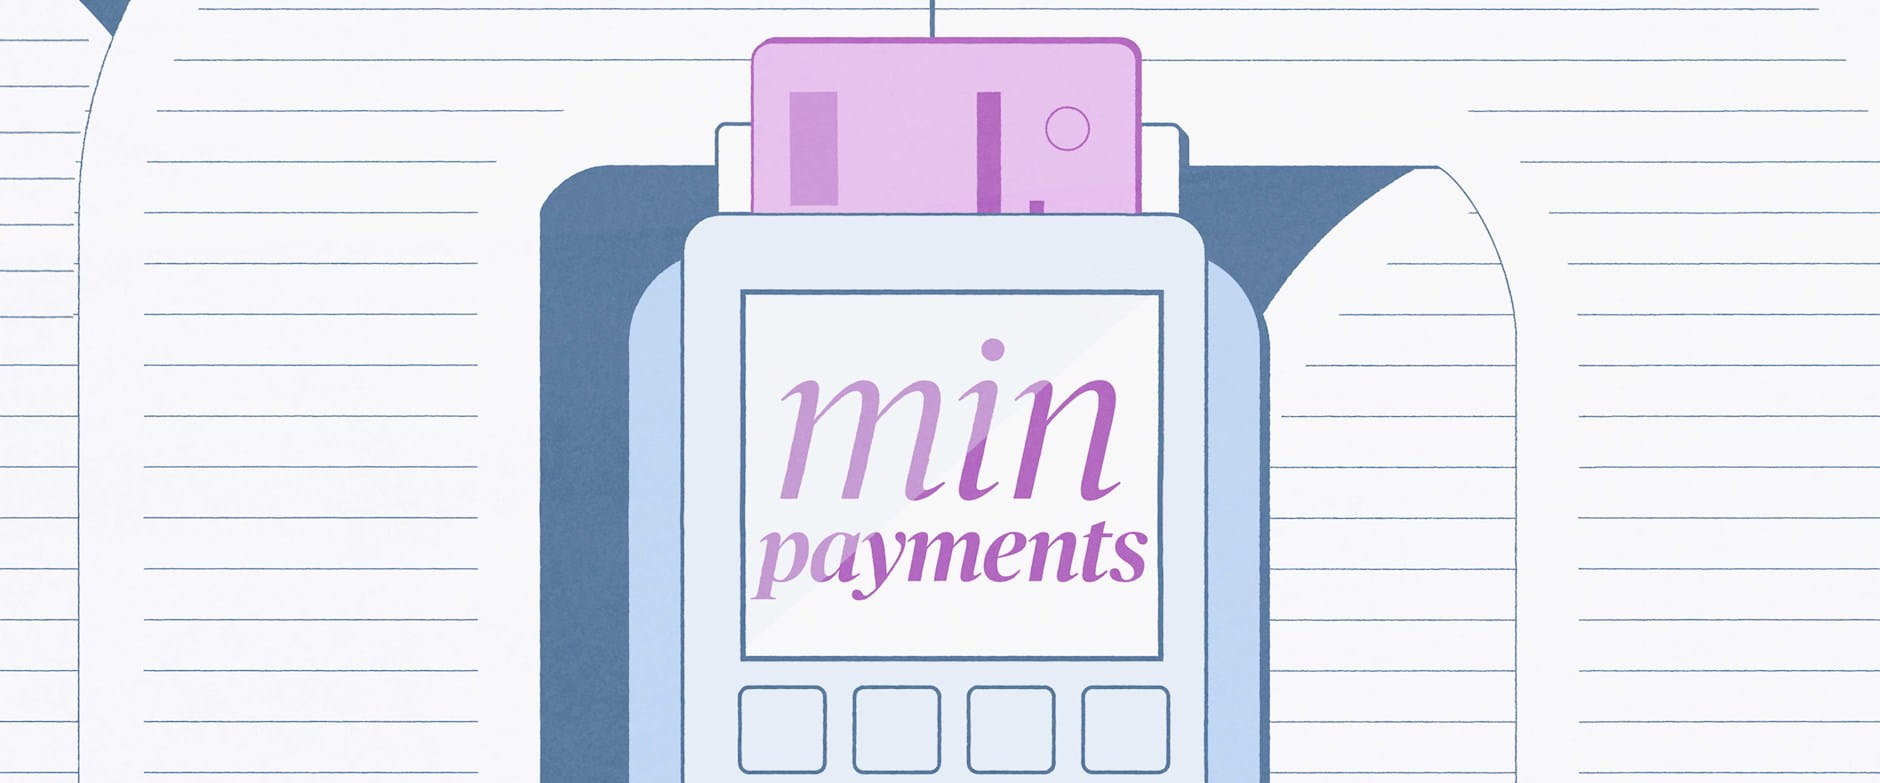 Credit card reader with screen that reads, "min payments"